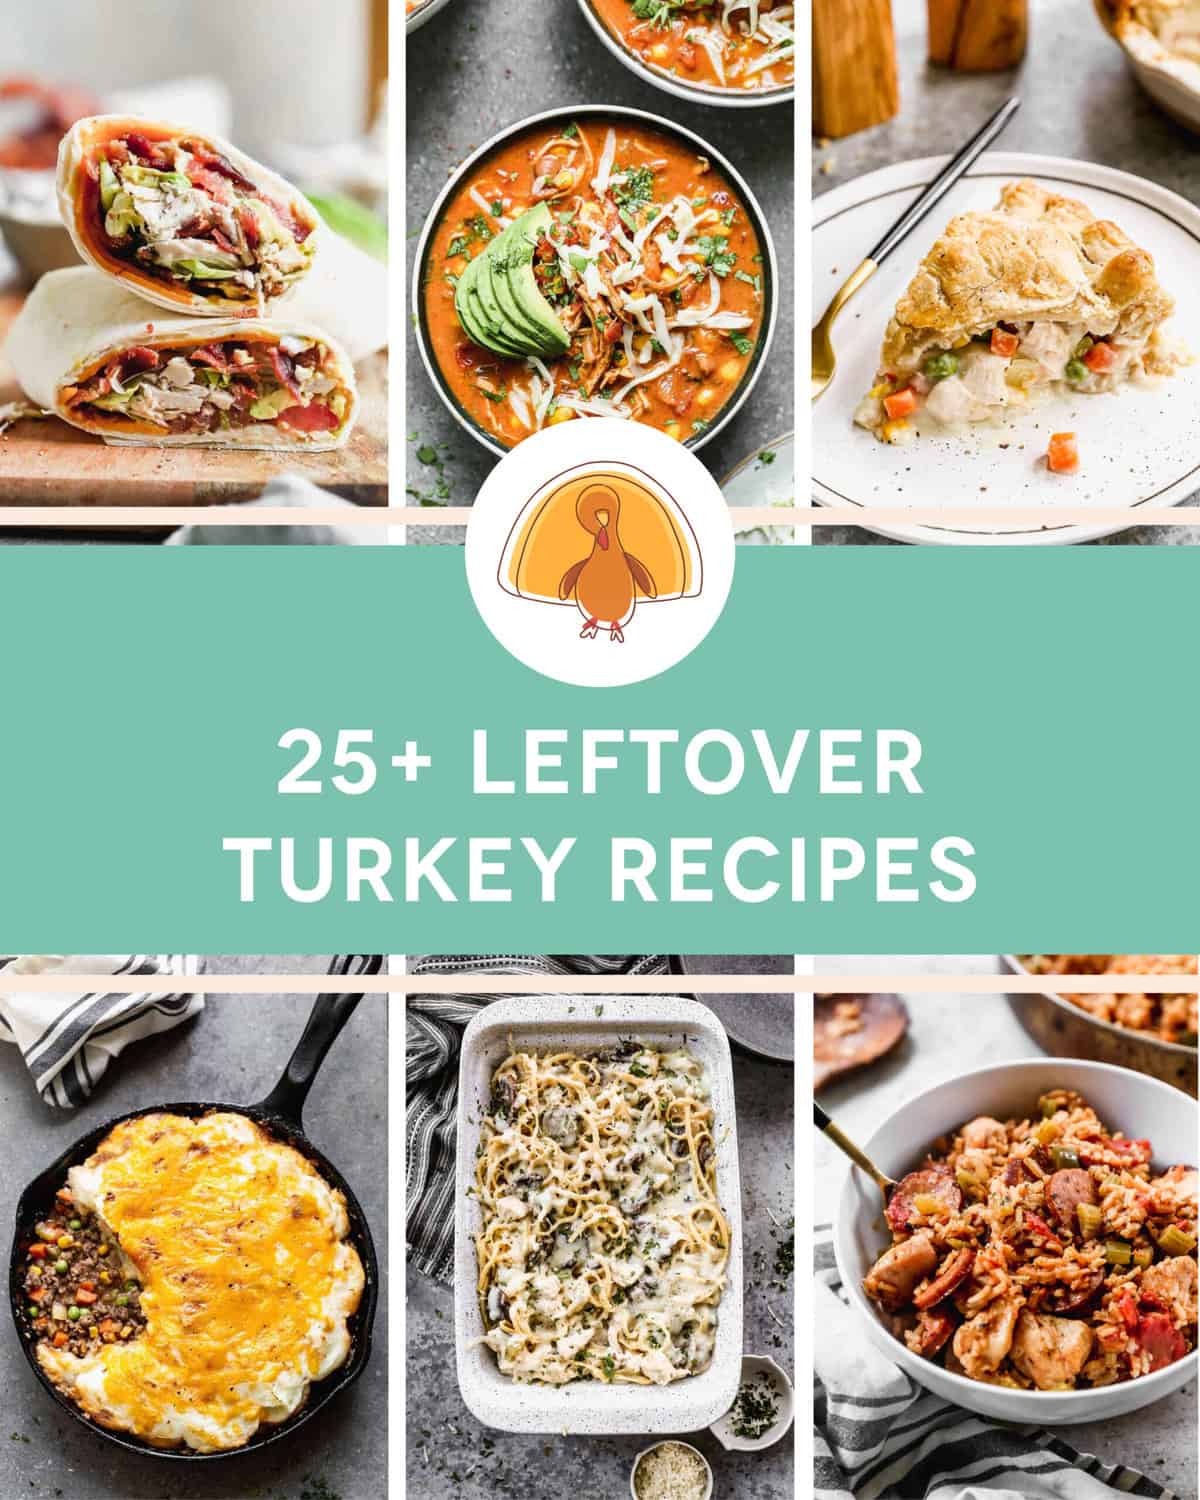 A collage image highlighting meals you can make with leftover Thanksgiving turkey.